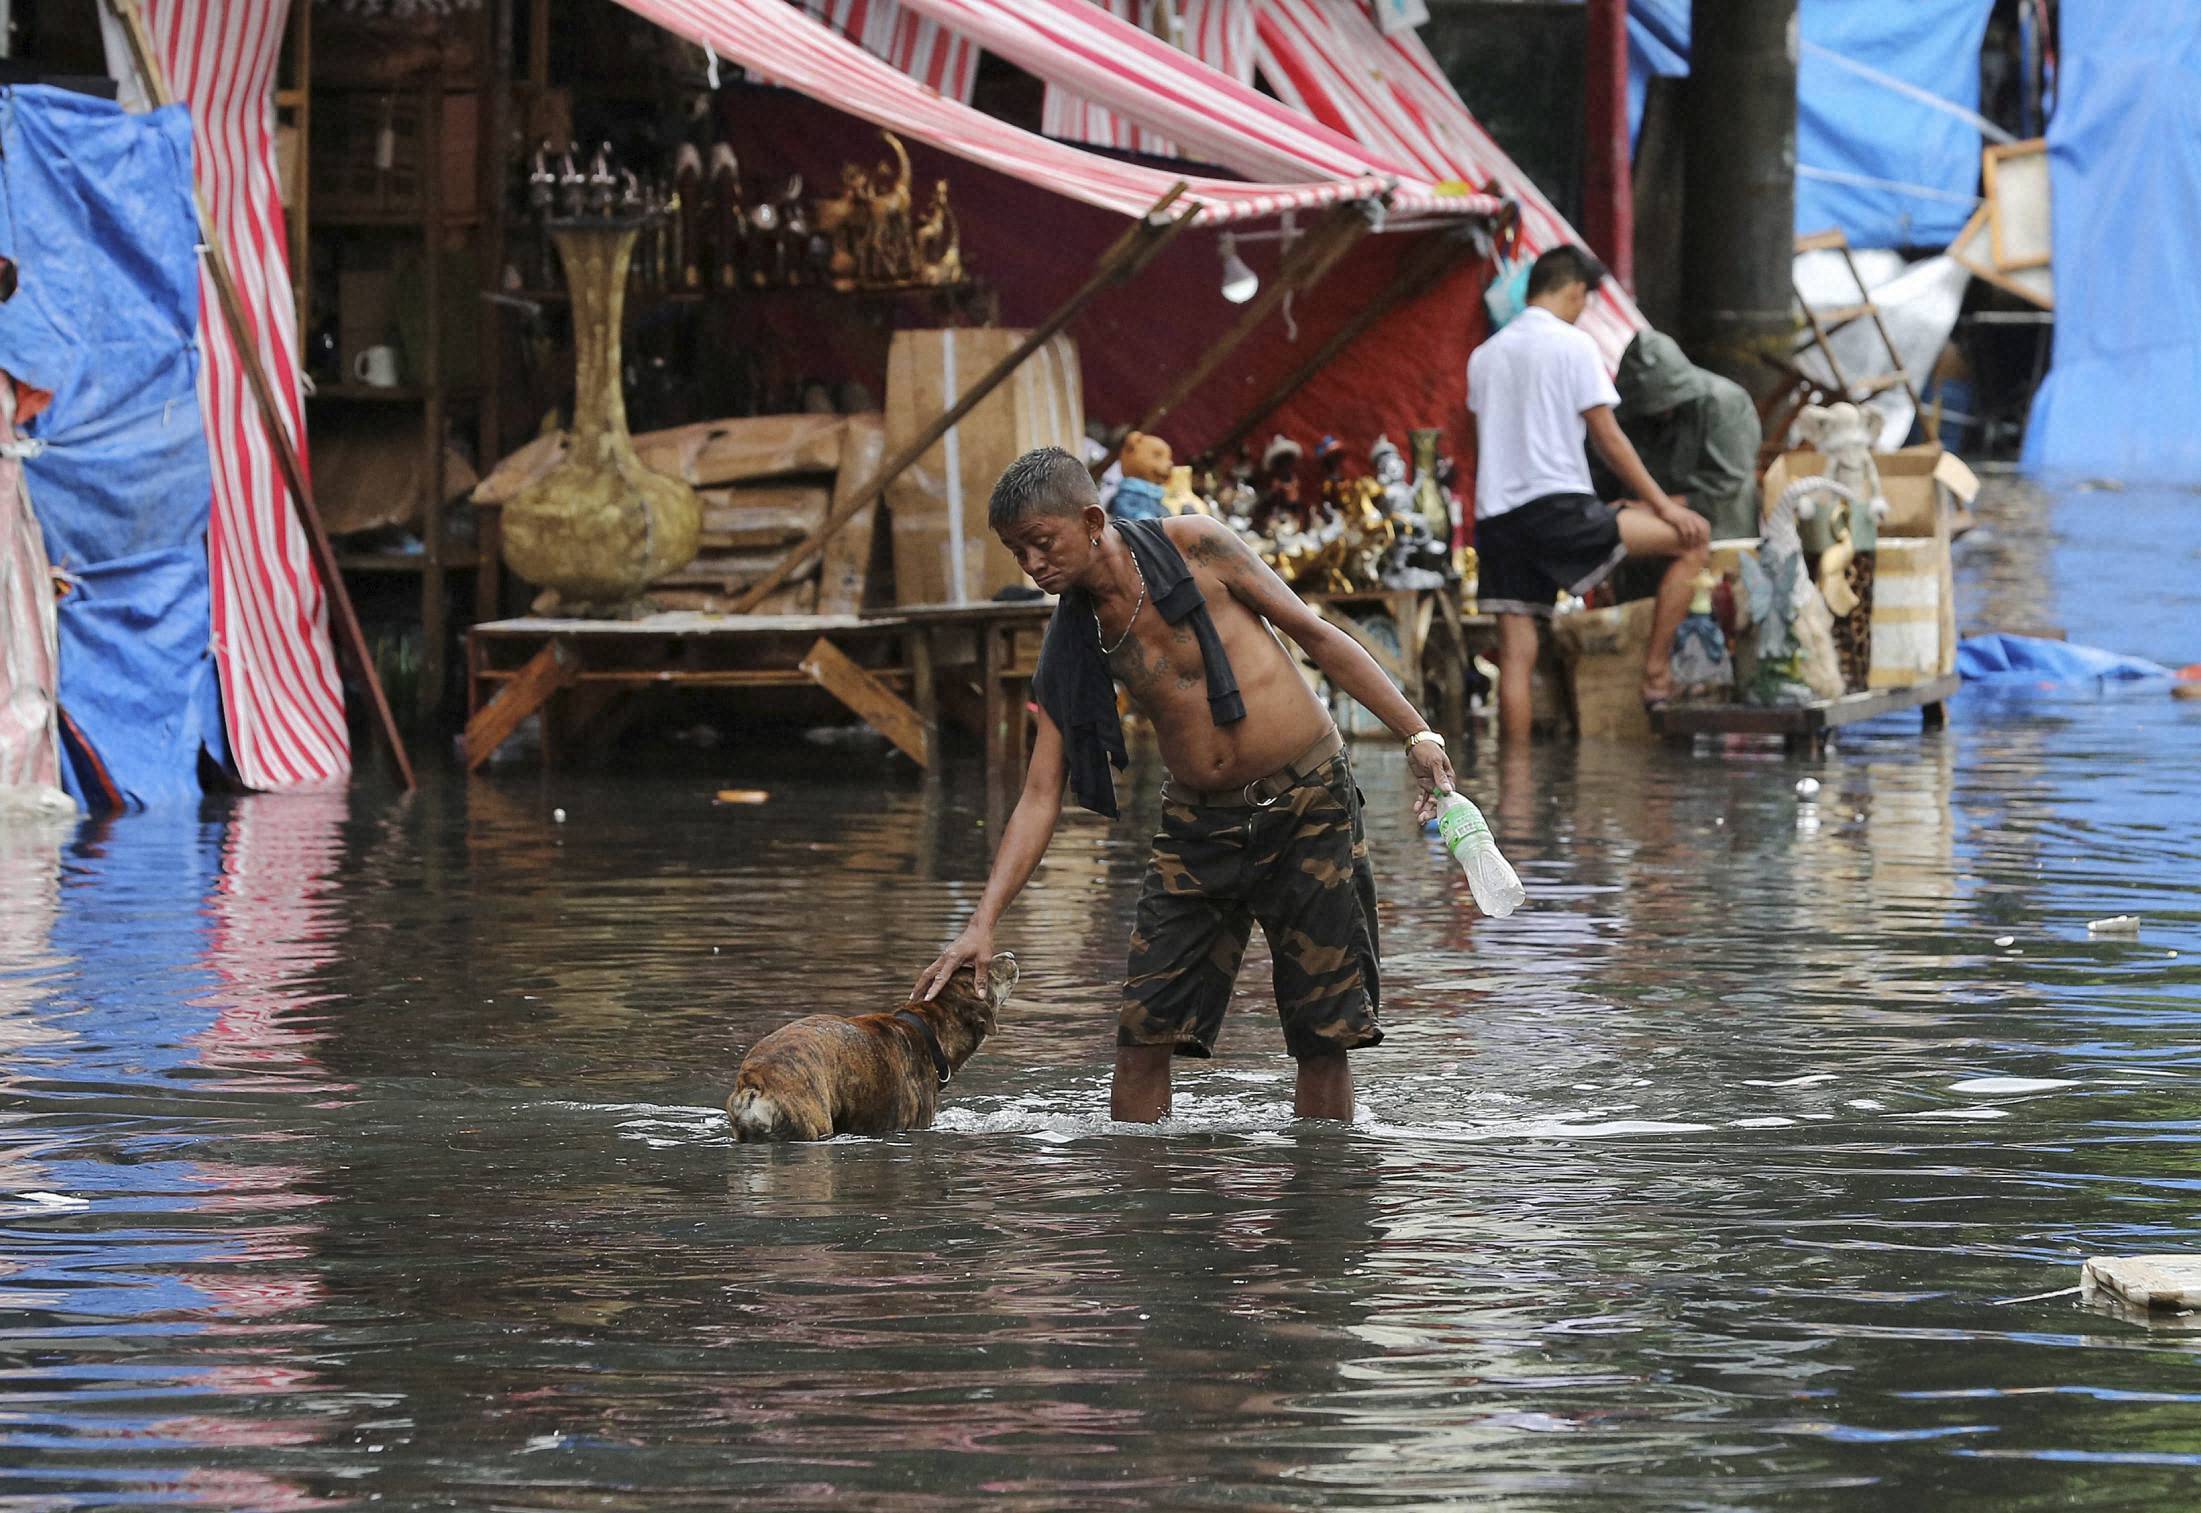 Typhoon eases but Philippines braces for floods, mudslides; 2 dead